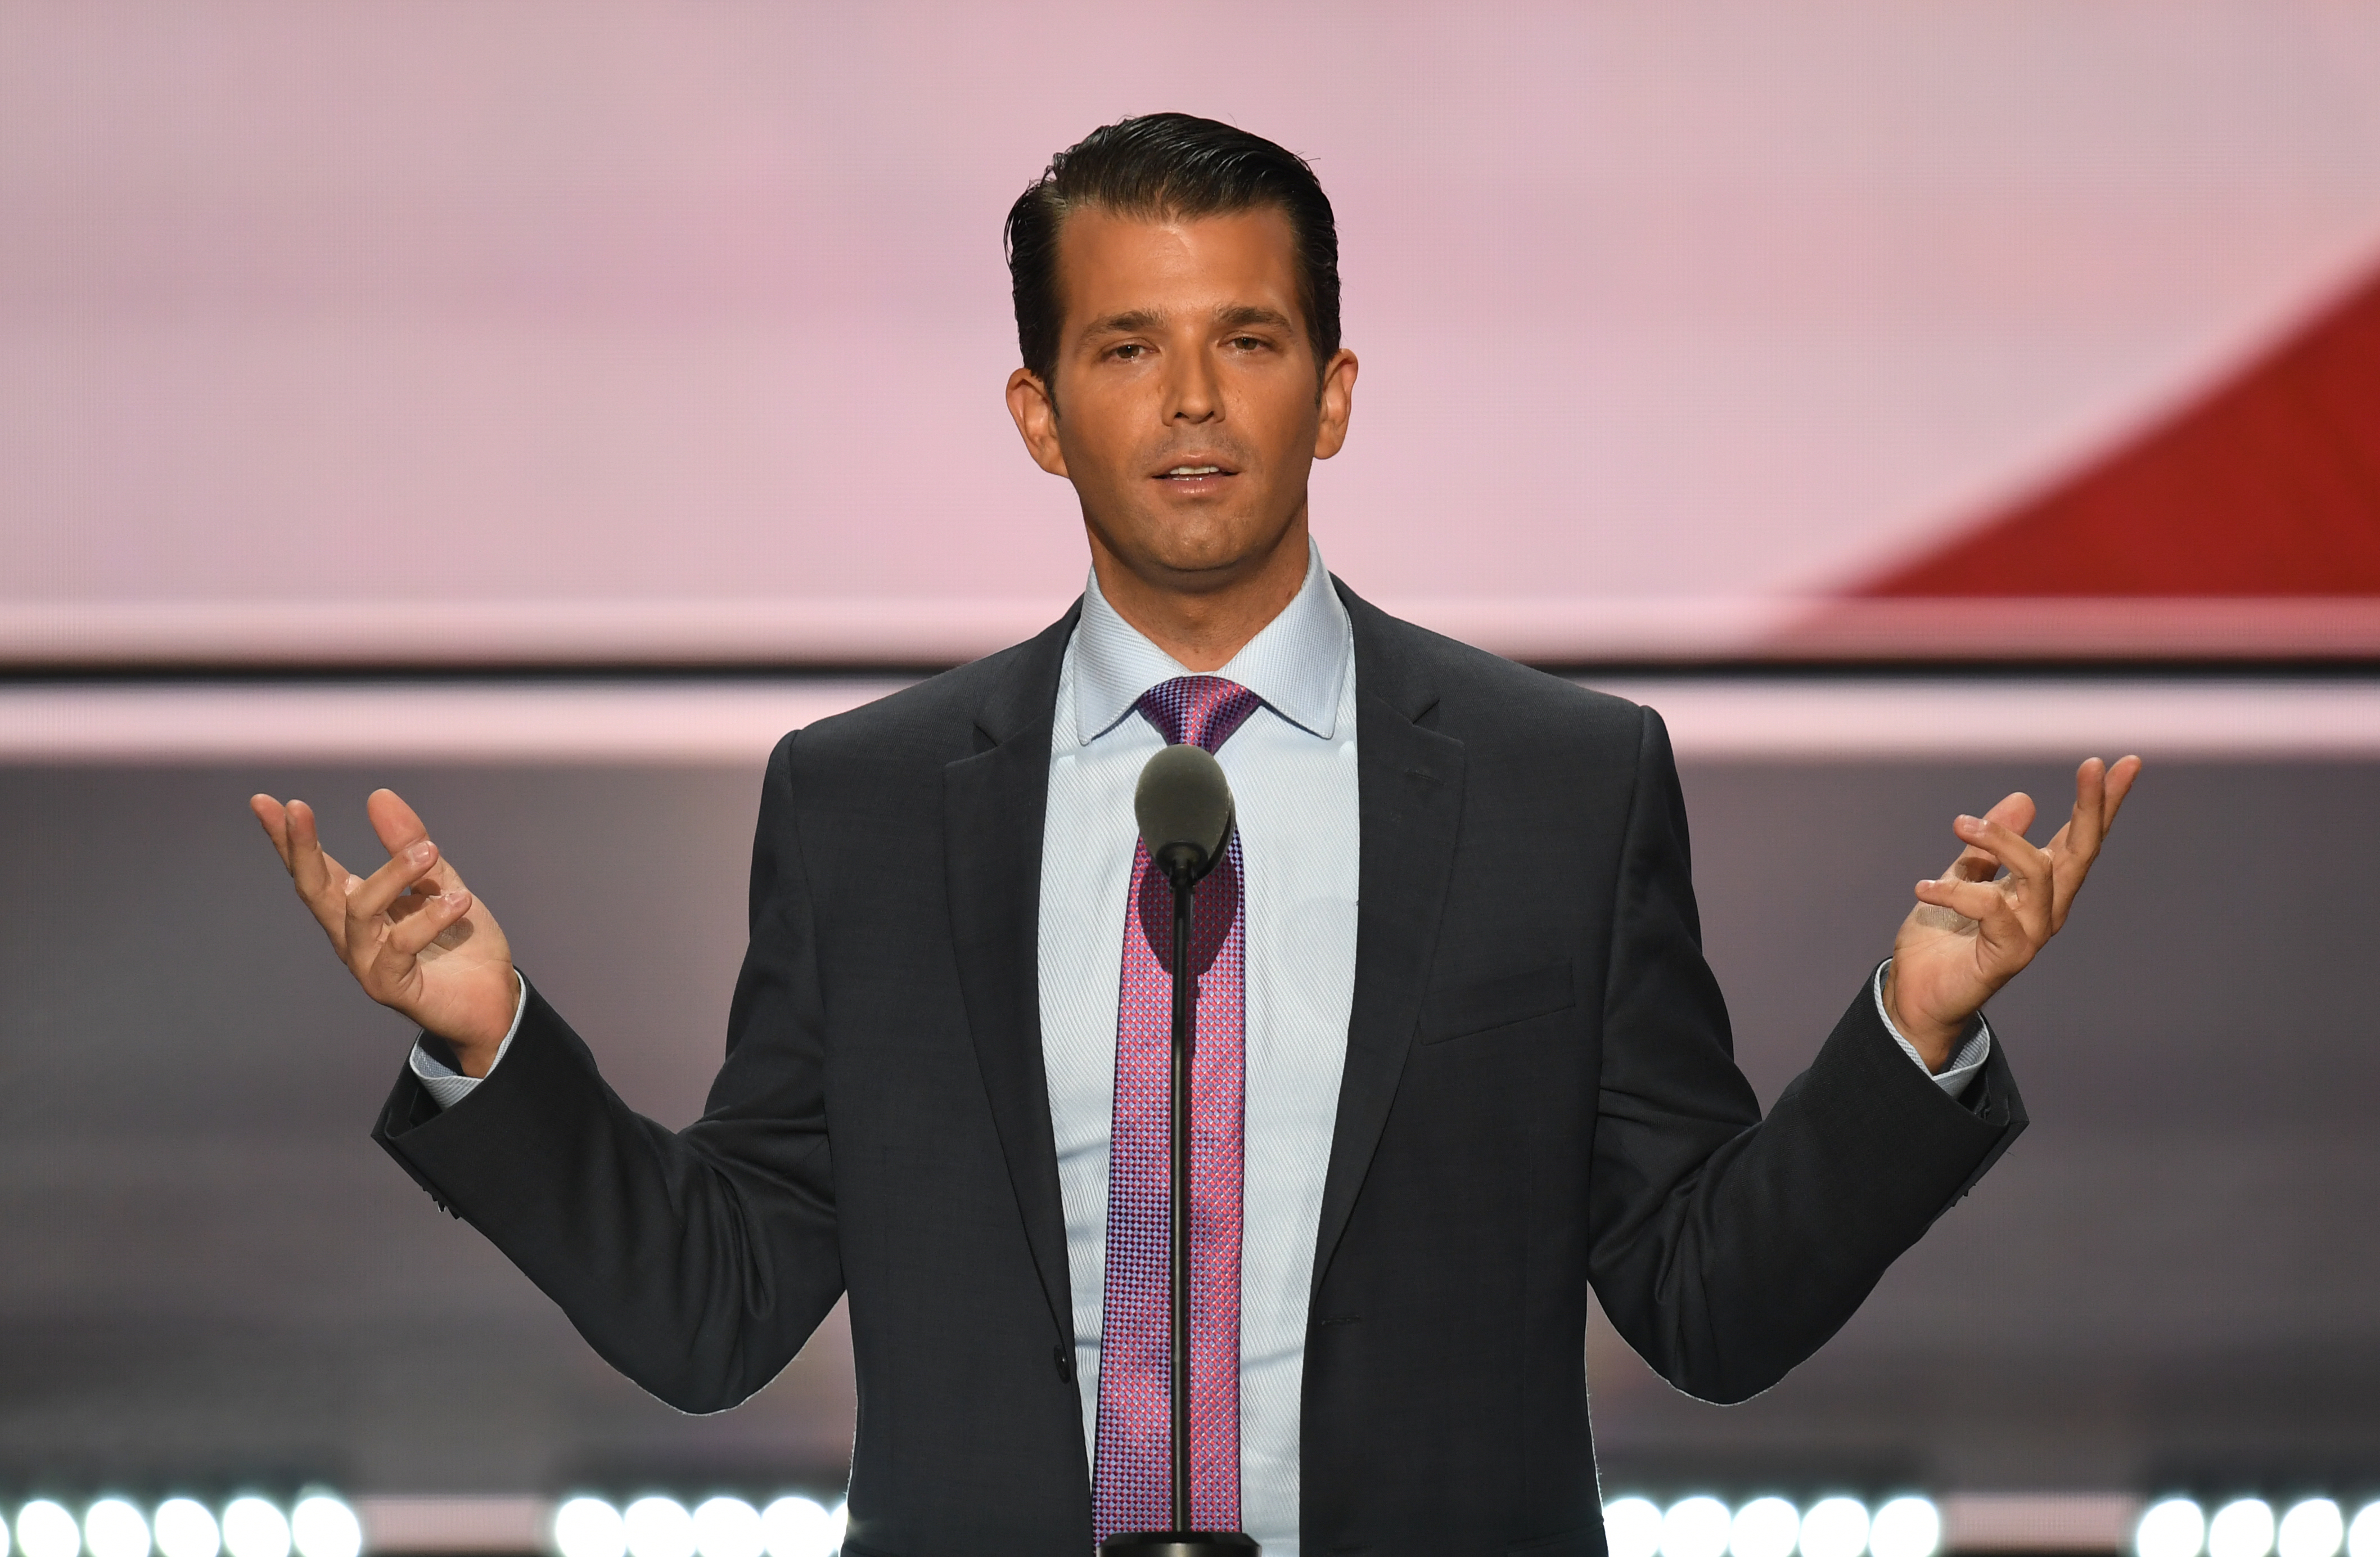 Donald Trump, Jr., son of Donald Trump, speaks on the second day of the Republican National Convention at the Quicken Loans Arena in Cleveland on July 19, 2016. The Republican Party formally nominated Donald Trump for president of the United States Tuesday, capping a roller-coaster campaign that saw the billionaire tycoon defeat 16 White House rivals. / AFP PHOTO / JIM WATSON